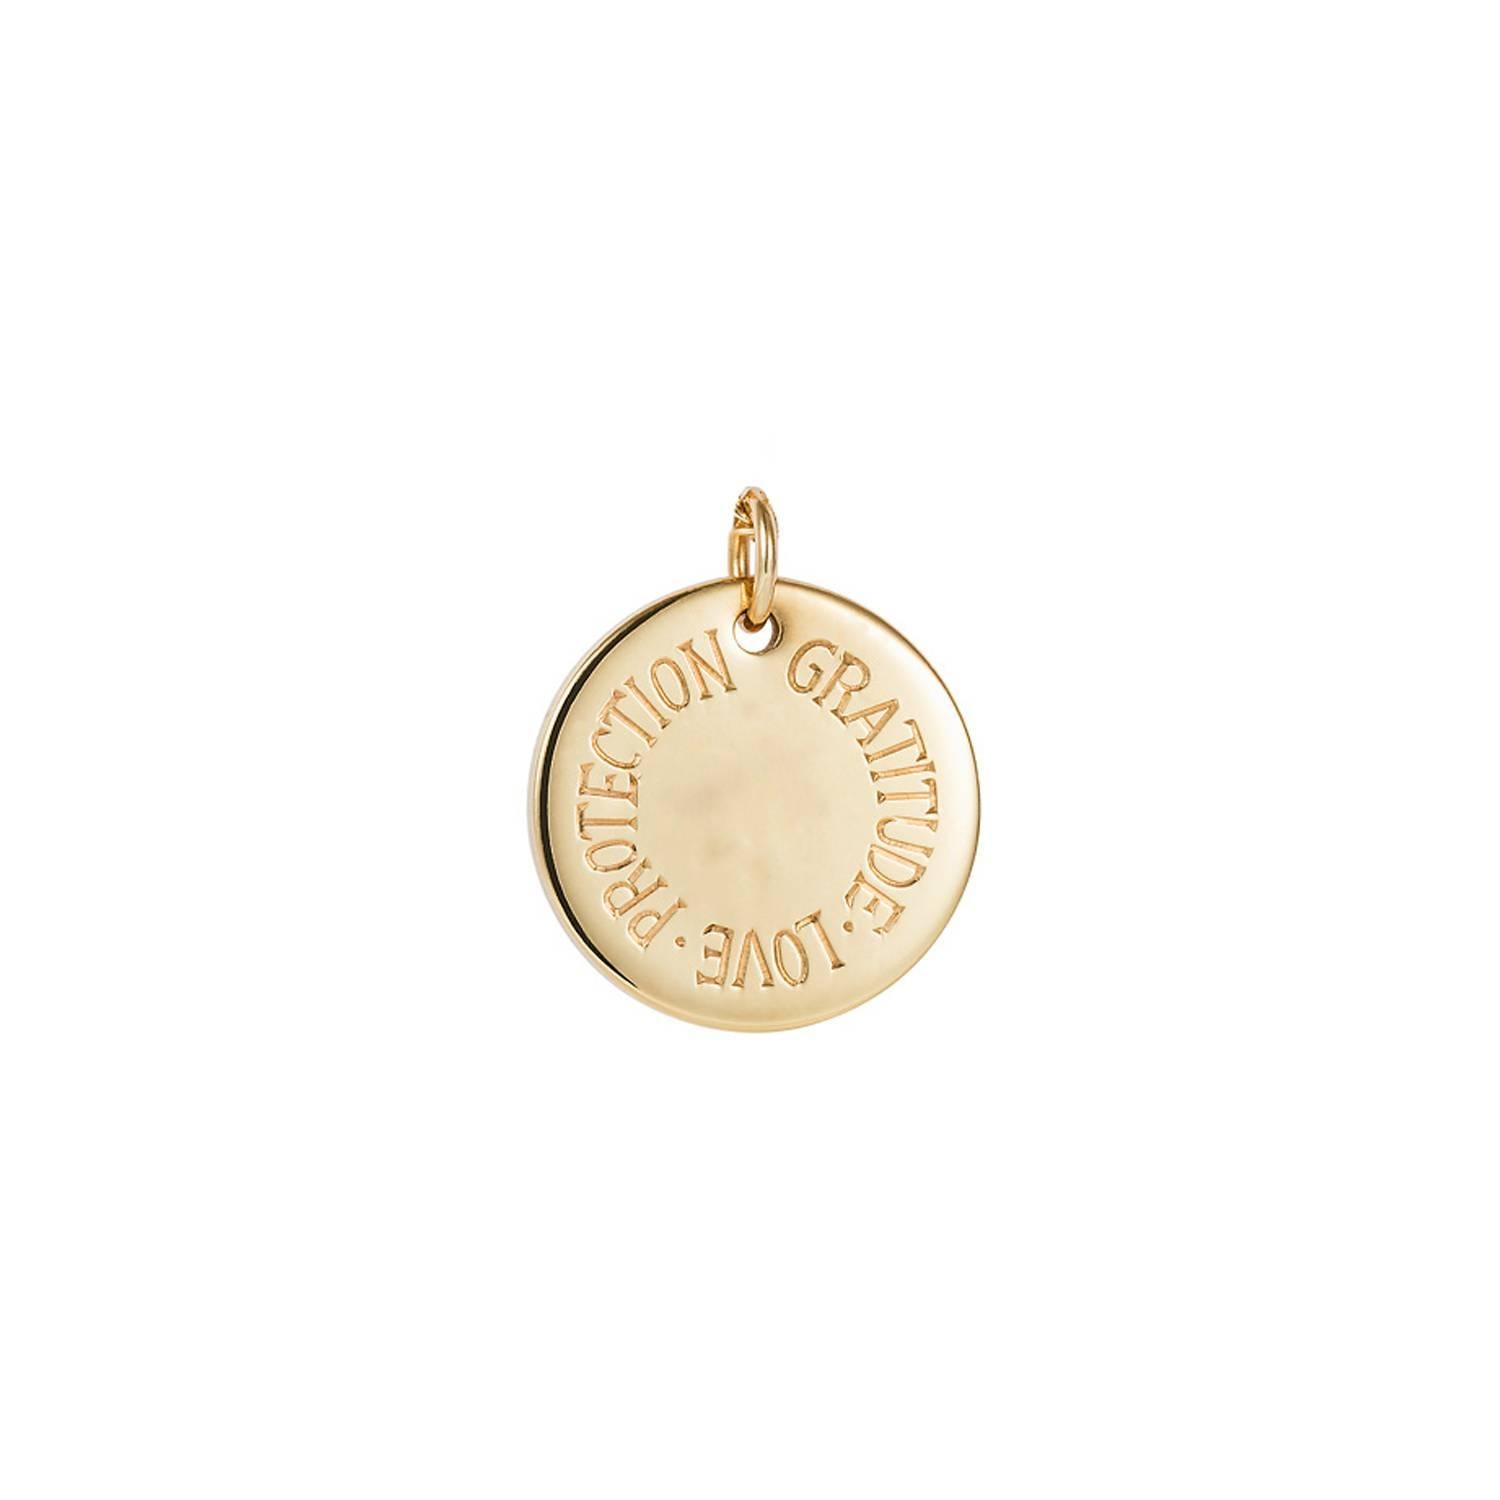 Beautiful and classic 9 karat gold charm disc set with white diamond. This gold charm has powerful words hand engraved around the disc to help protect its wearer.  

Hand made and hand engraved in England by experienced work shops in Hatton Garden,